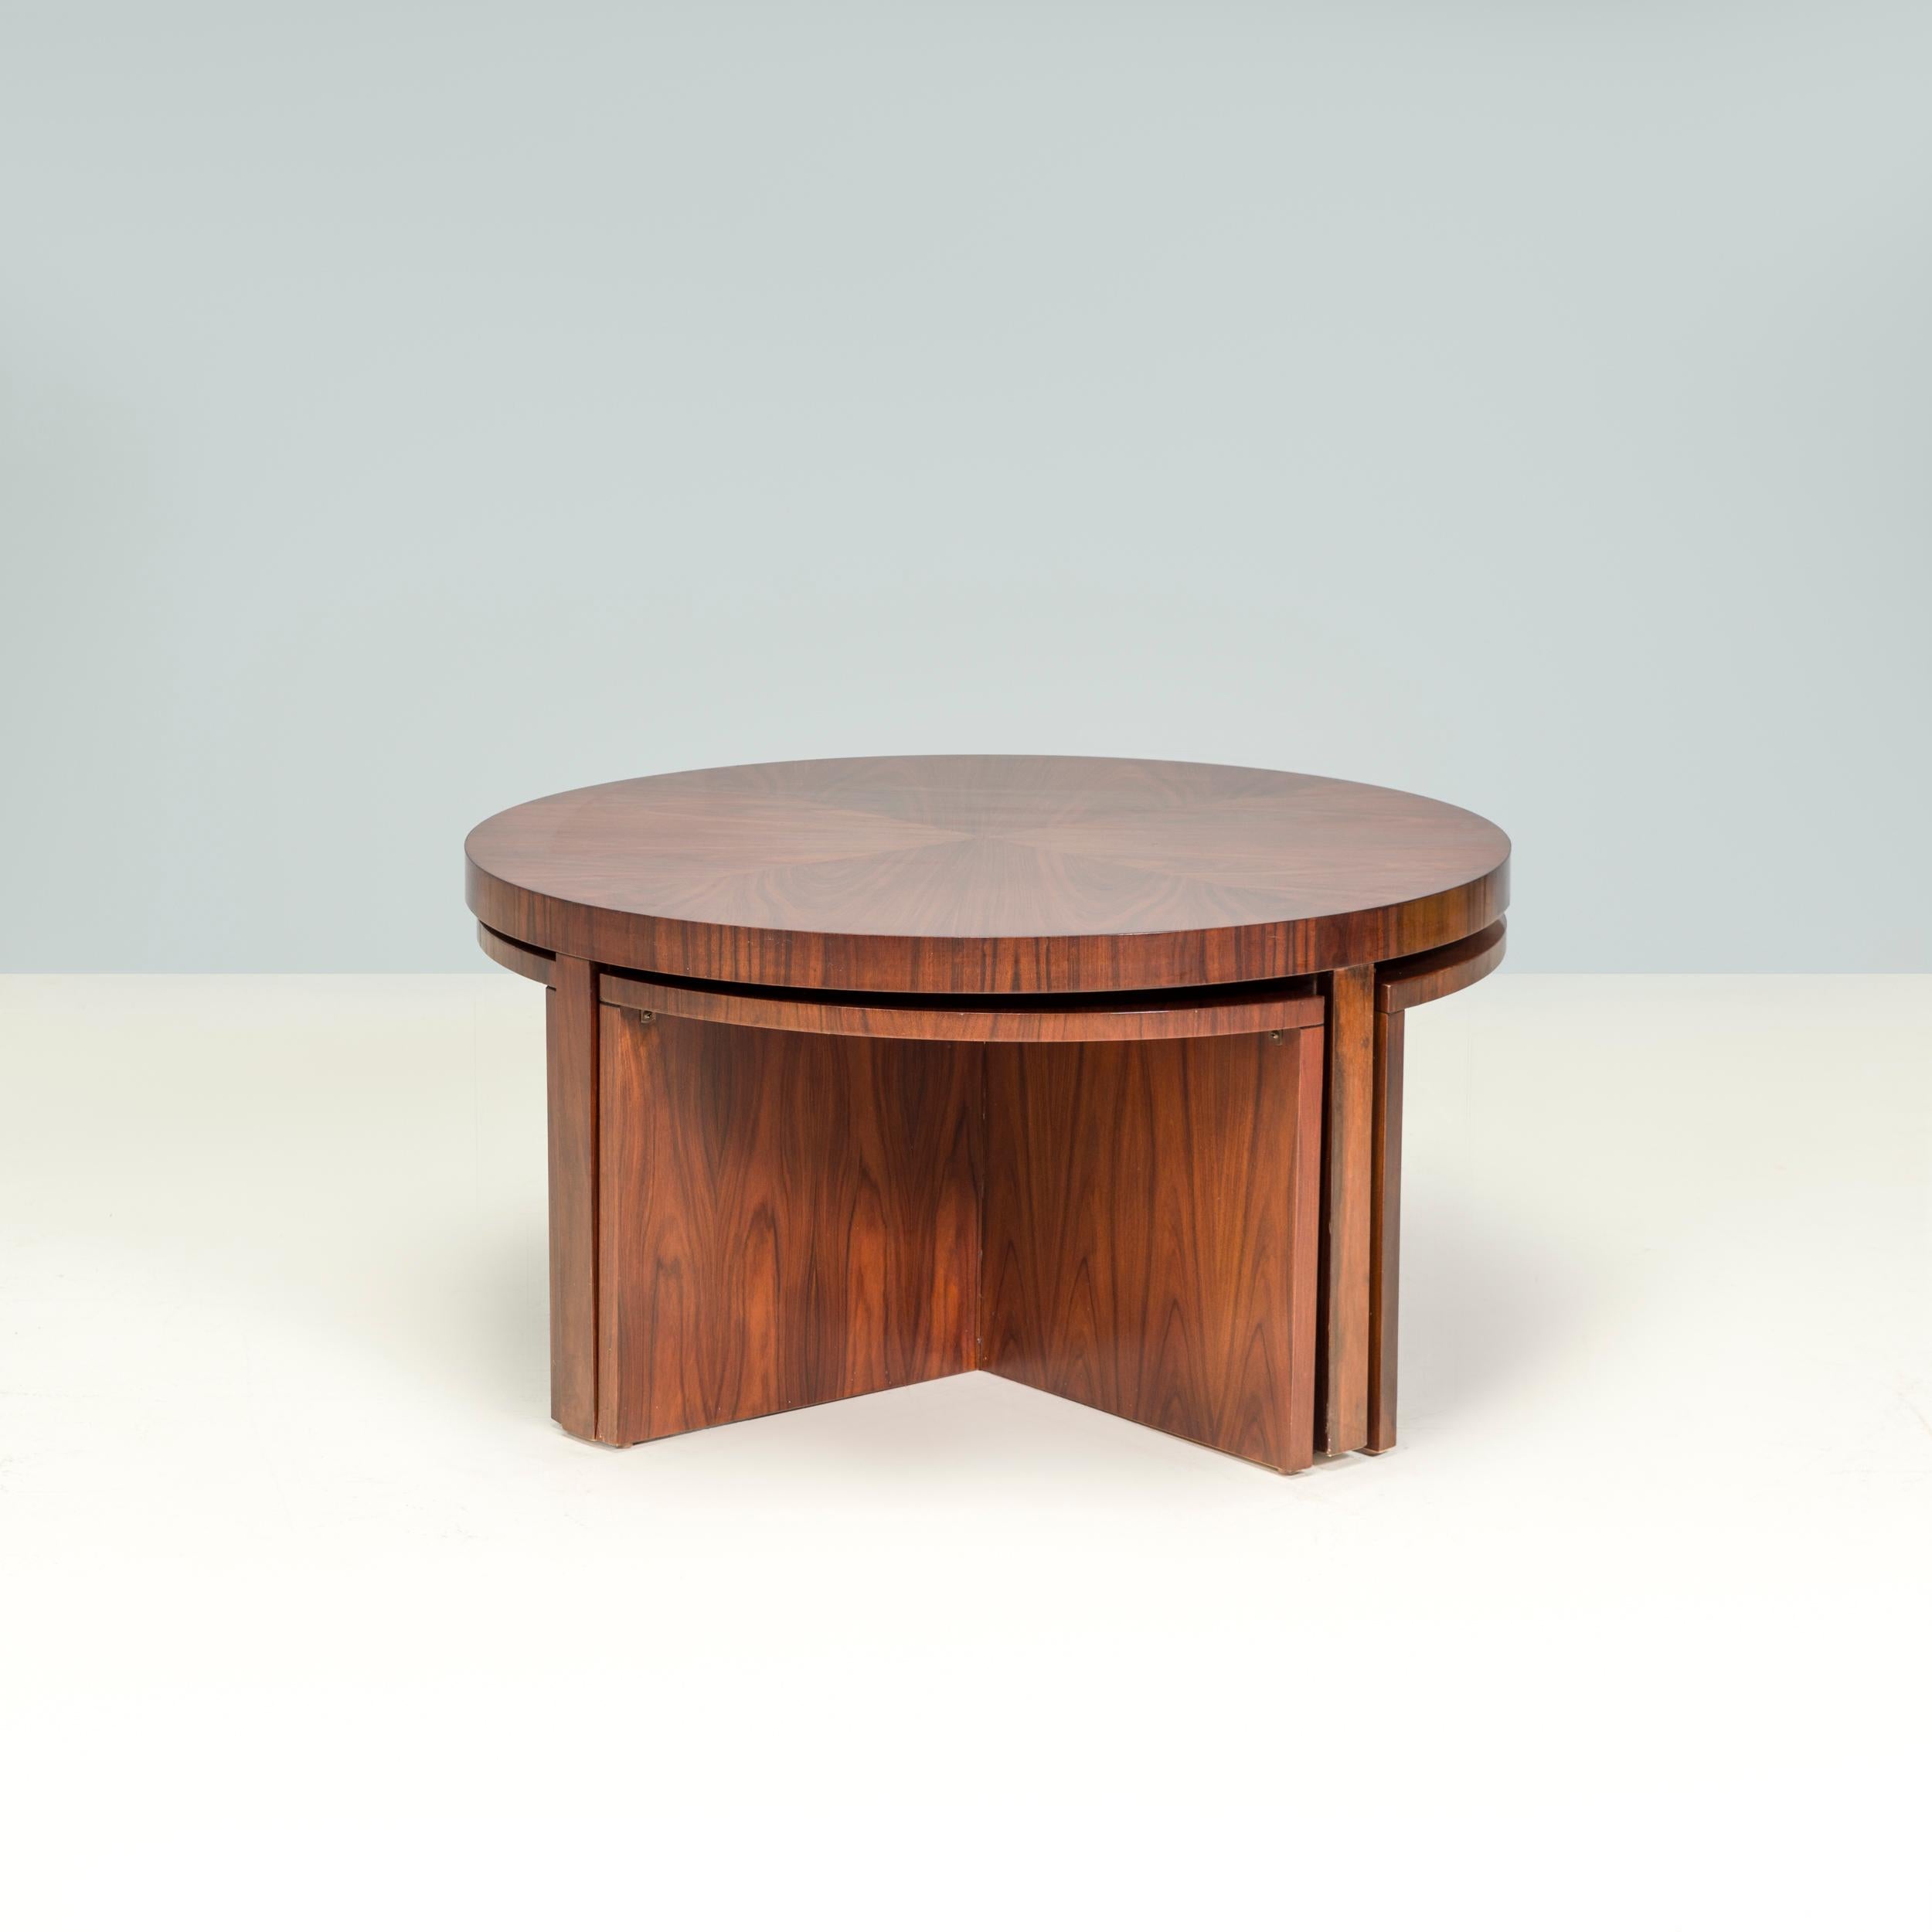 Inspired by the 1930s, the Ralph Lauren Duke collection balances elegant design with luxury handcrafted materials.

Constructed from wood with a Santos rosewood veneer finish, the Duke coffee table is formed of one larger round table with four